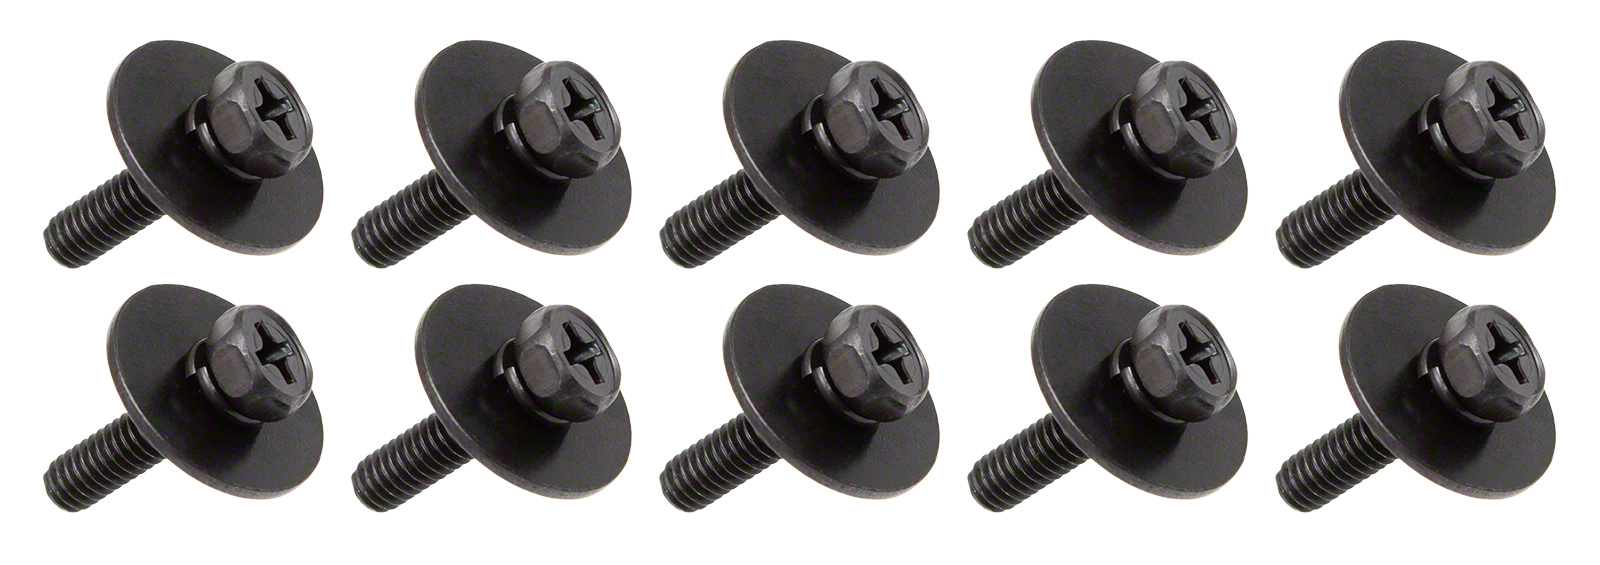 SPAREDRUM WSC4-16BK - M4 16MM - MOUNTING SCREW FOR WOODEN SHELL - BLACK (X10)